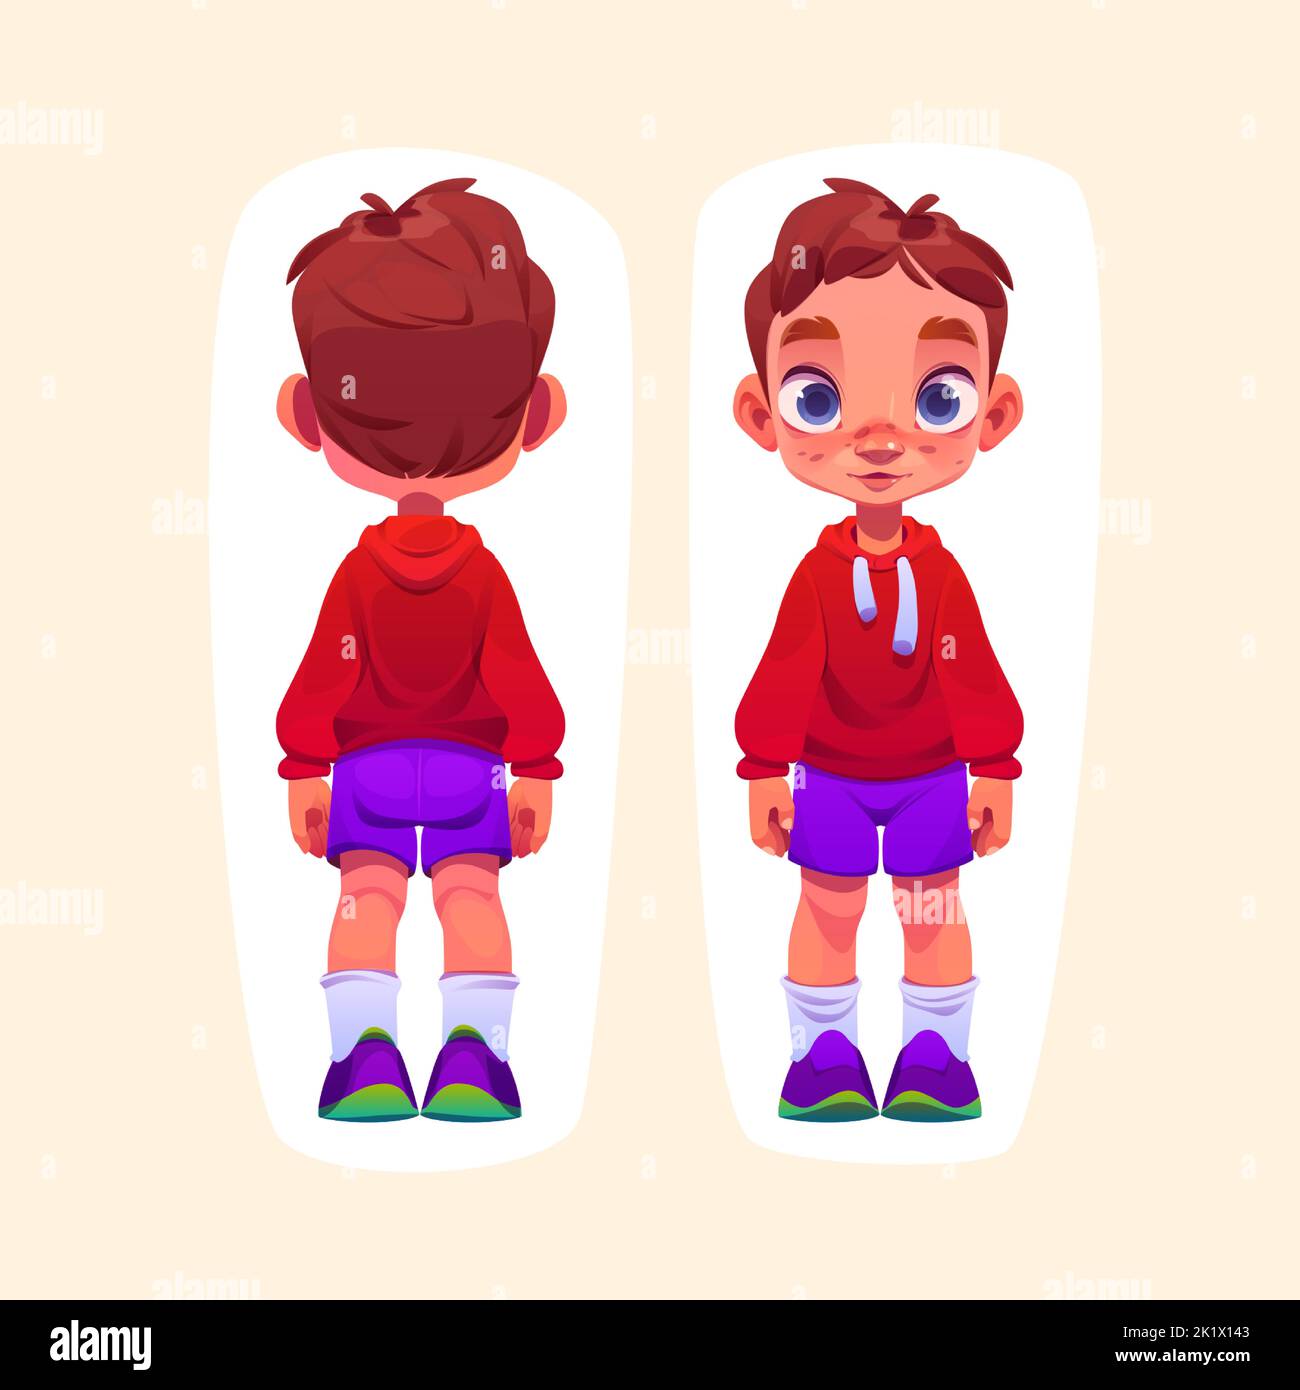 Little boy cartoon character front and rear view. Cute toddler wear red hoodie, purple shorts, white socks and shoes. Funny child with ginger hair, blue eyes and freckles on face Vector illustration Stock Vector